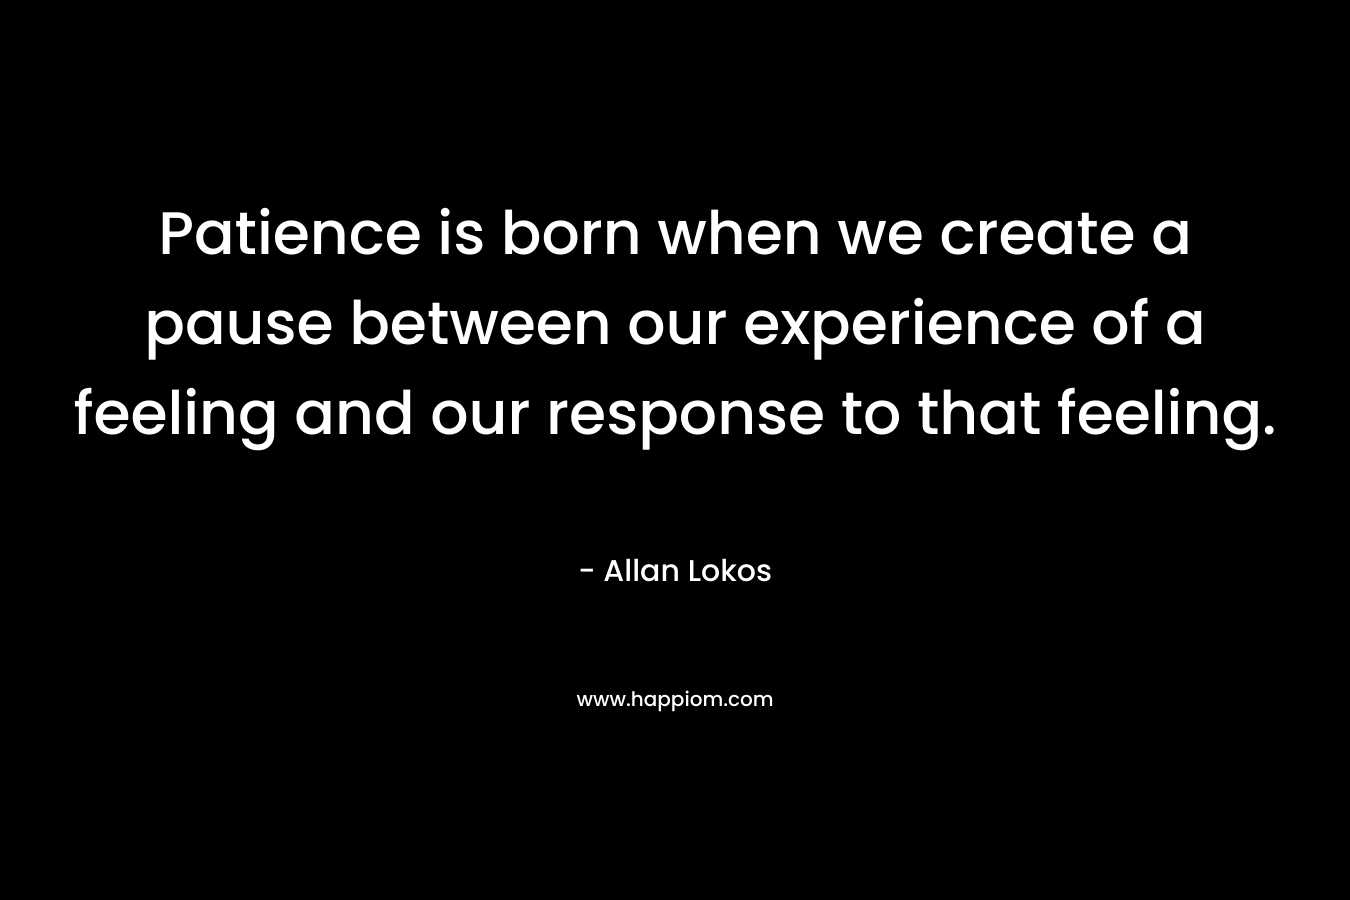 Patience is born when we create a pause between our experience of a feeling and our response to that feeling.